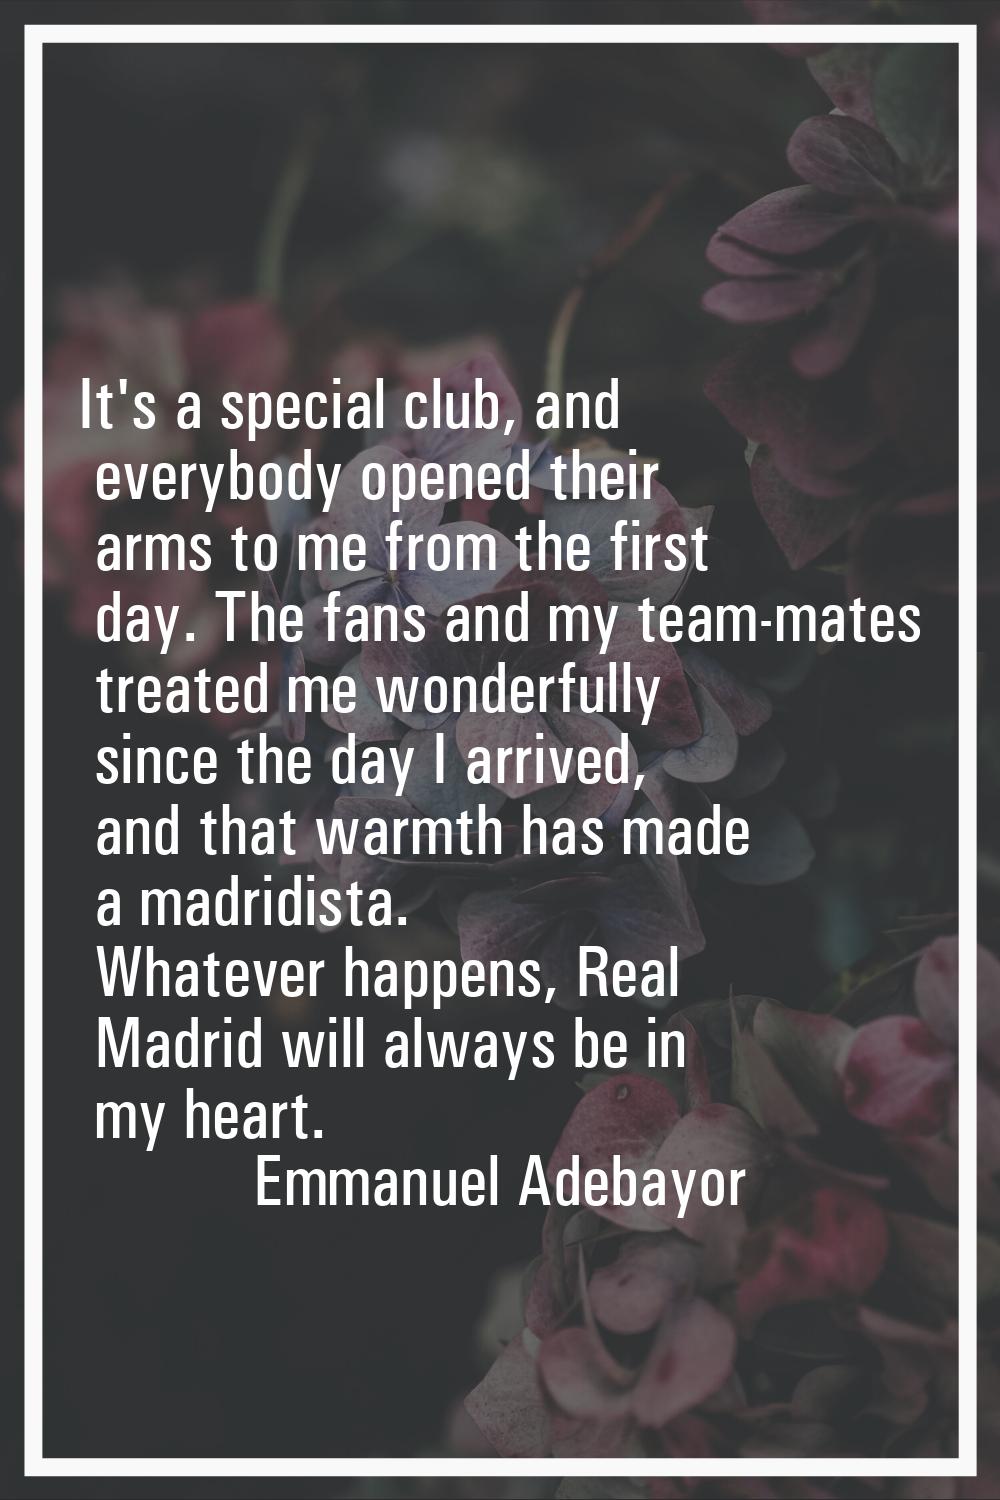 It's a special club, and everybody opened their arms to me from the first day. The fans and my team